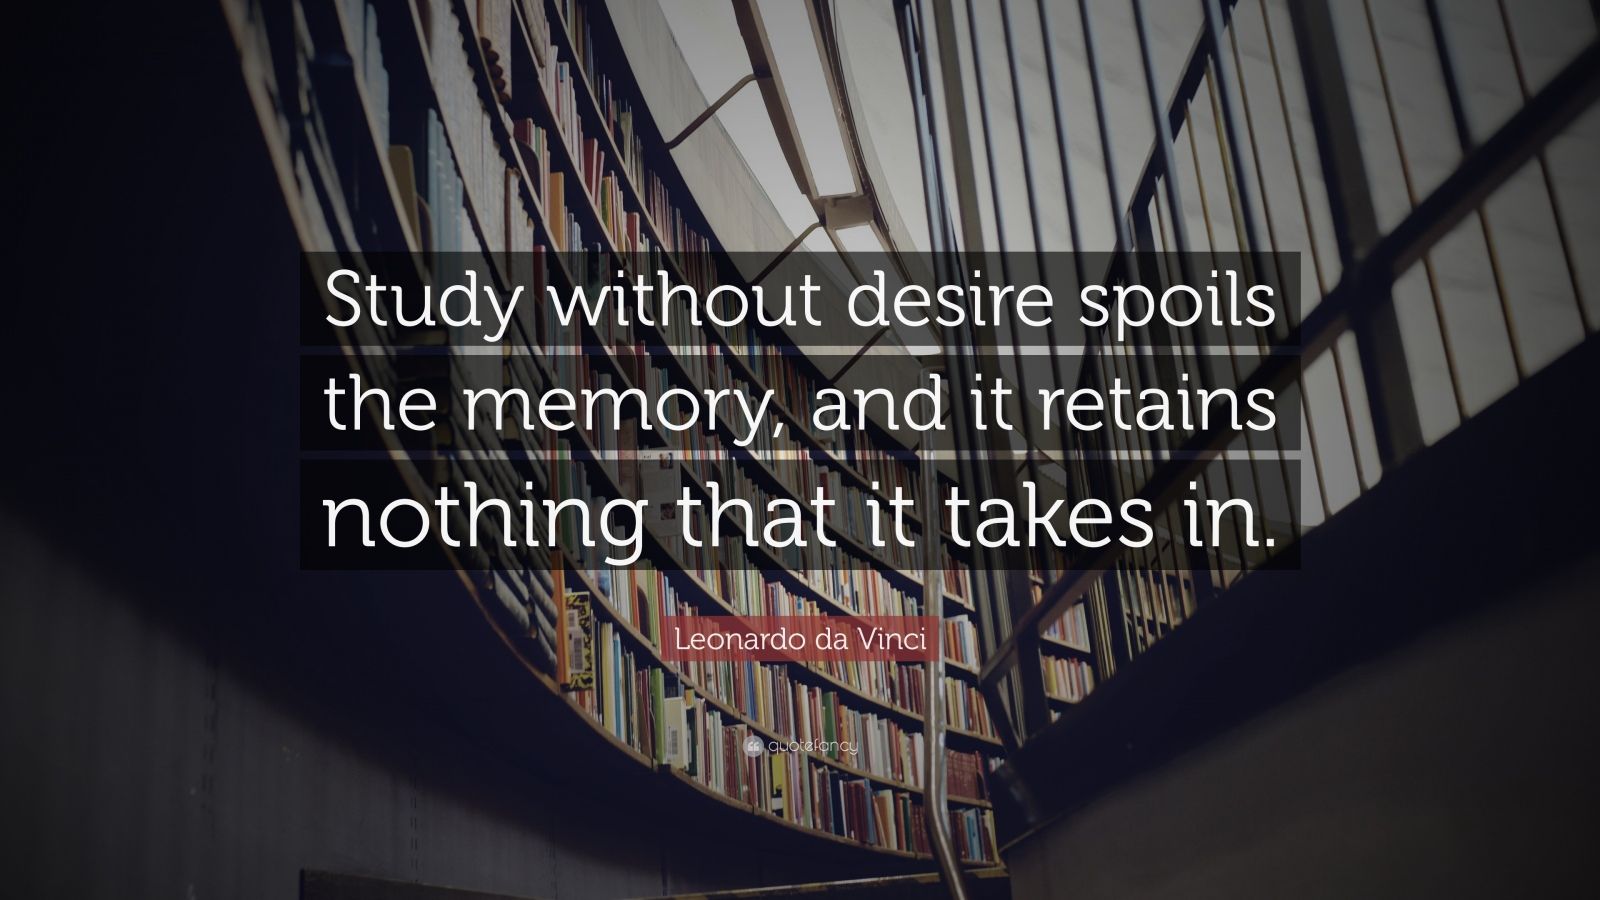 quote: "study without desire spoils the memory, and it retains